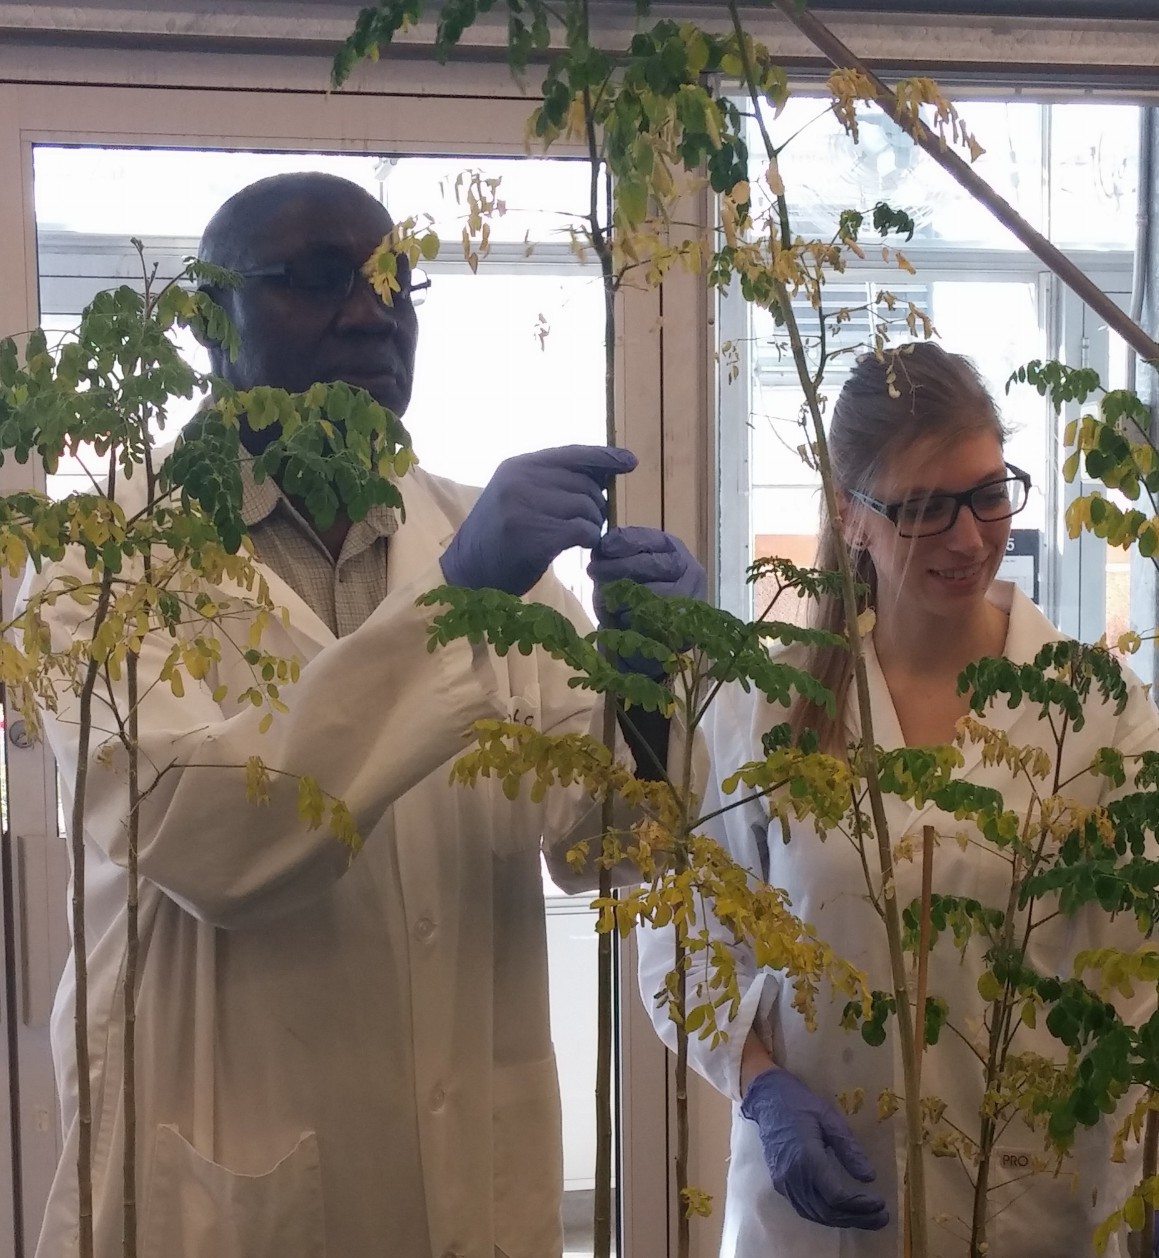 UNBC researchers tap tropical miracle tree to treat contaminated water